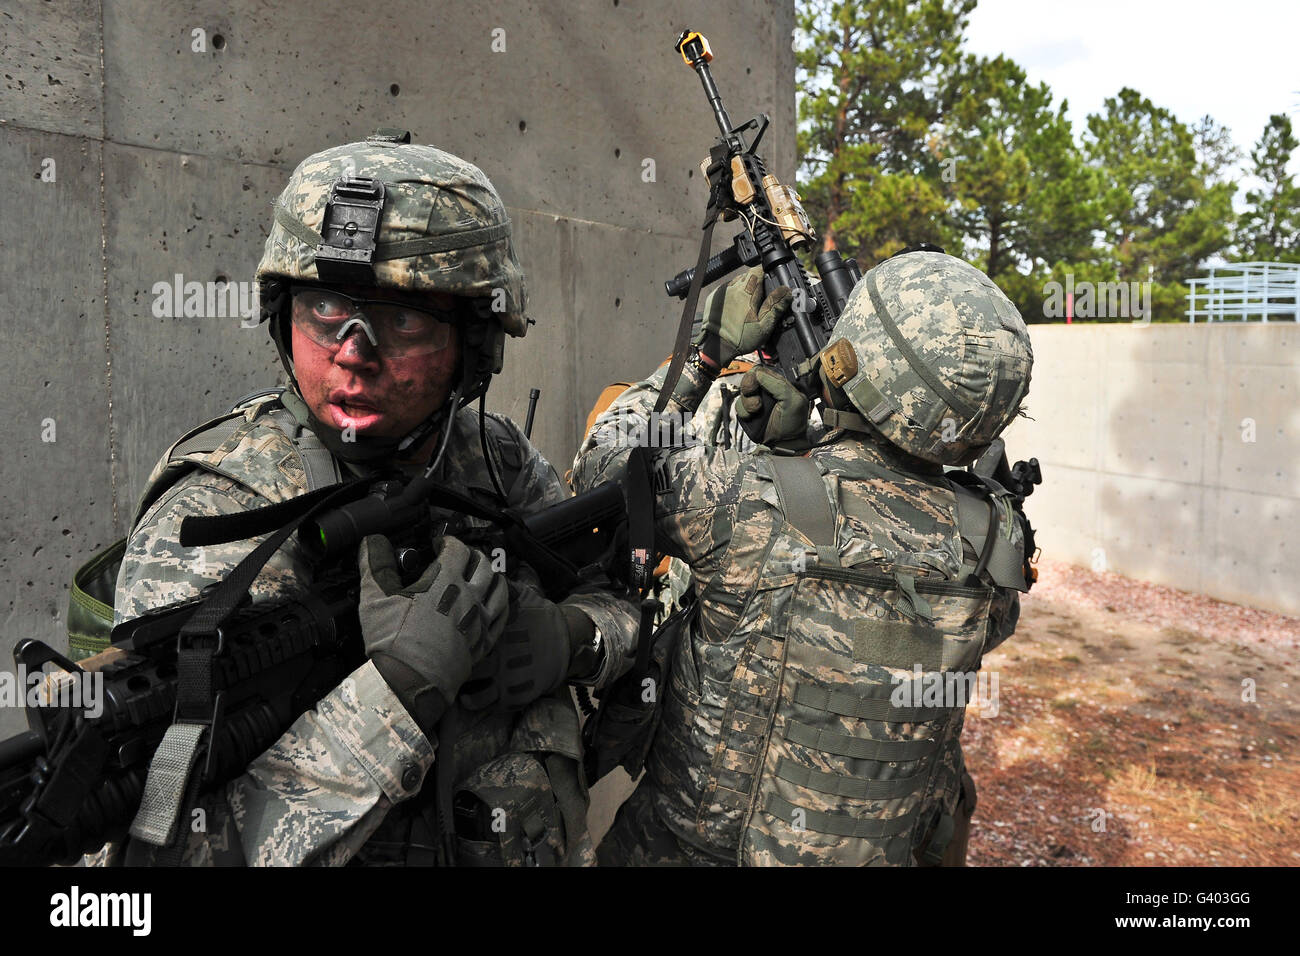 Airman provides rear protection against potential enemy surprises during a raid. Stock Photo